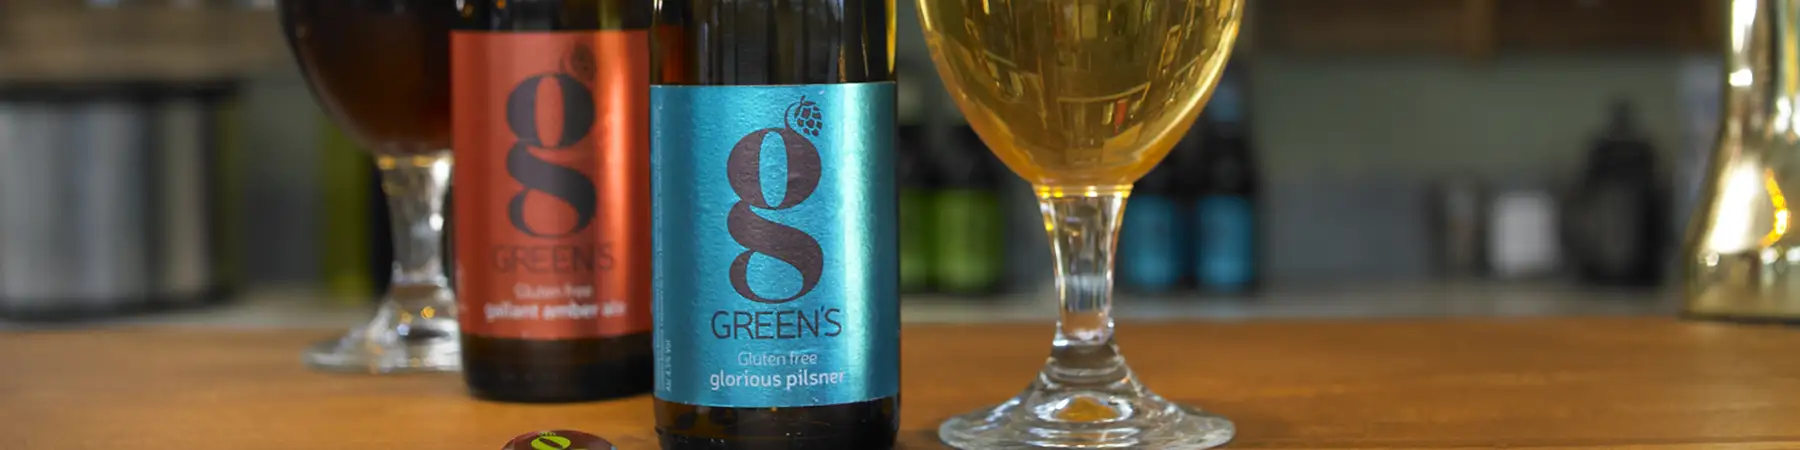 close up of skinny brands label on bottles with pint glass filled